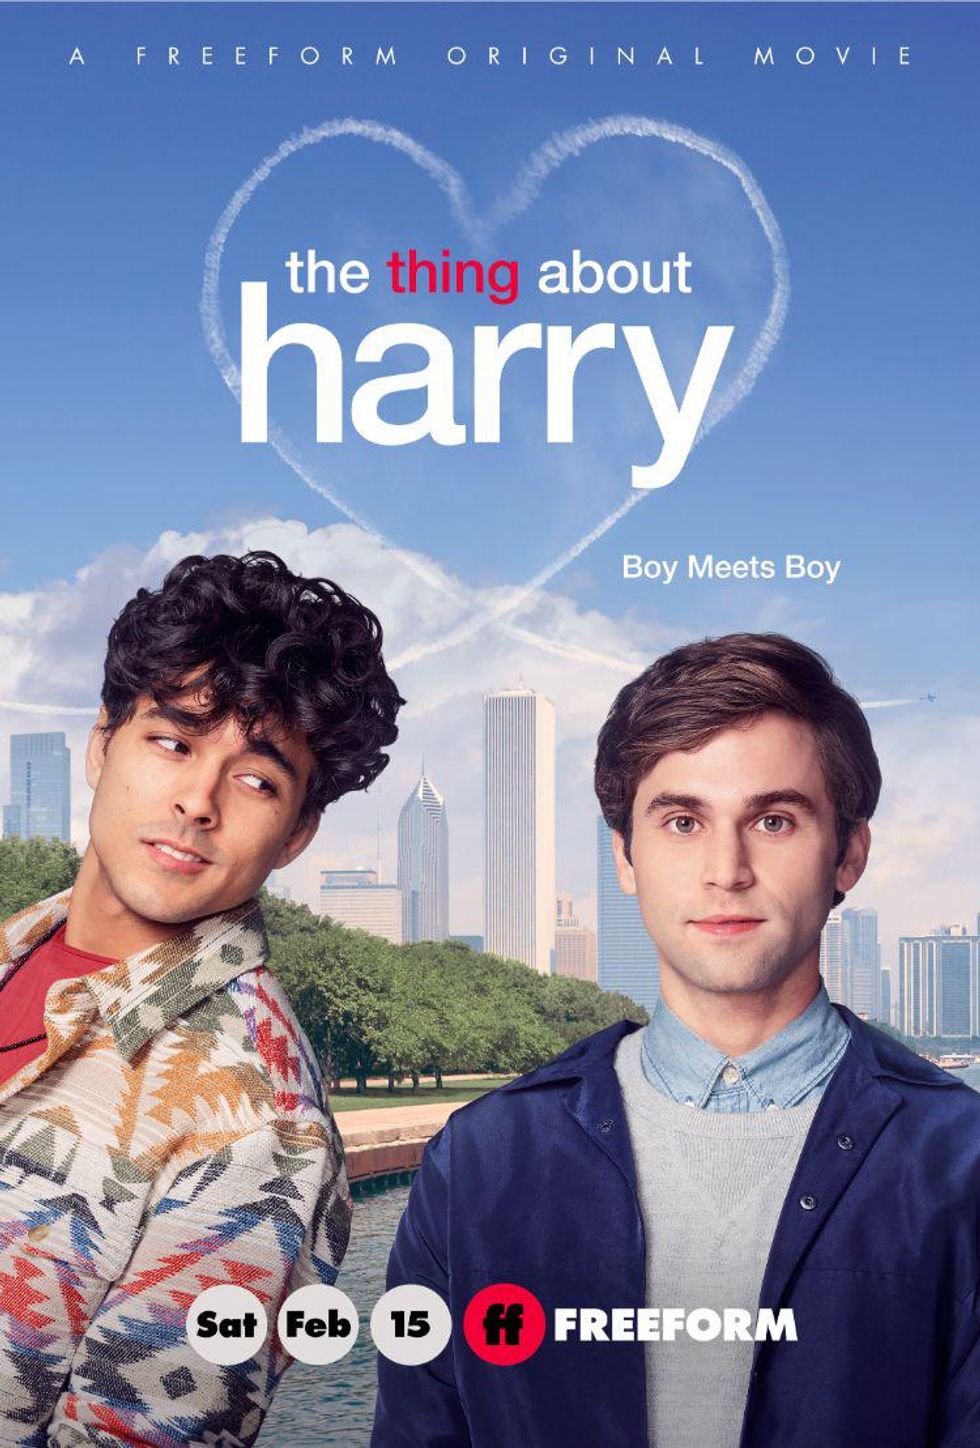 The First Look at Gay Rom-Com 'The Thing About Harry' Is Here!